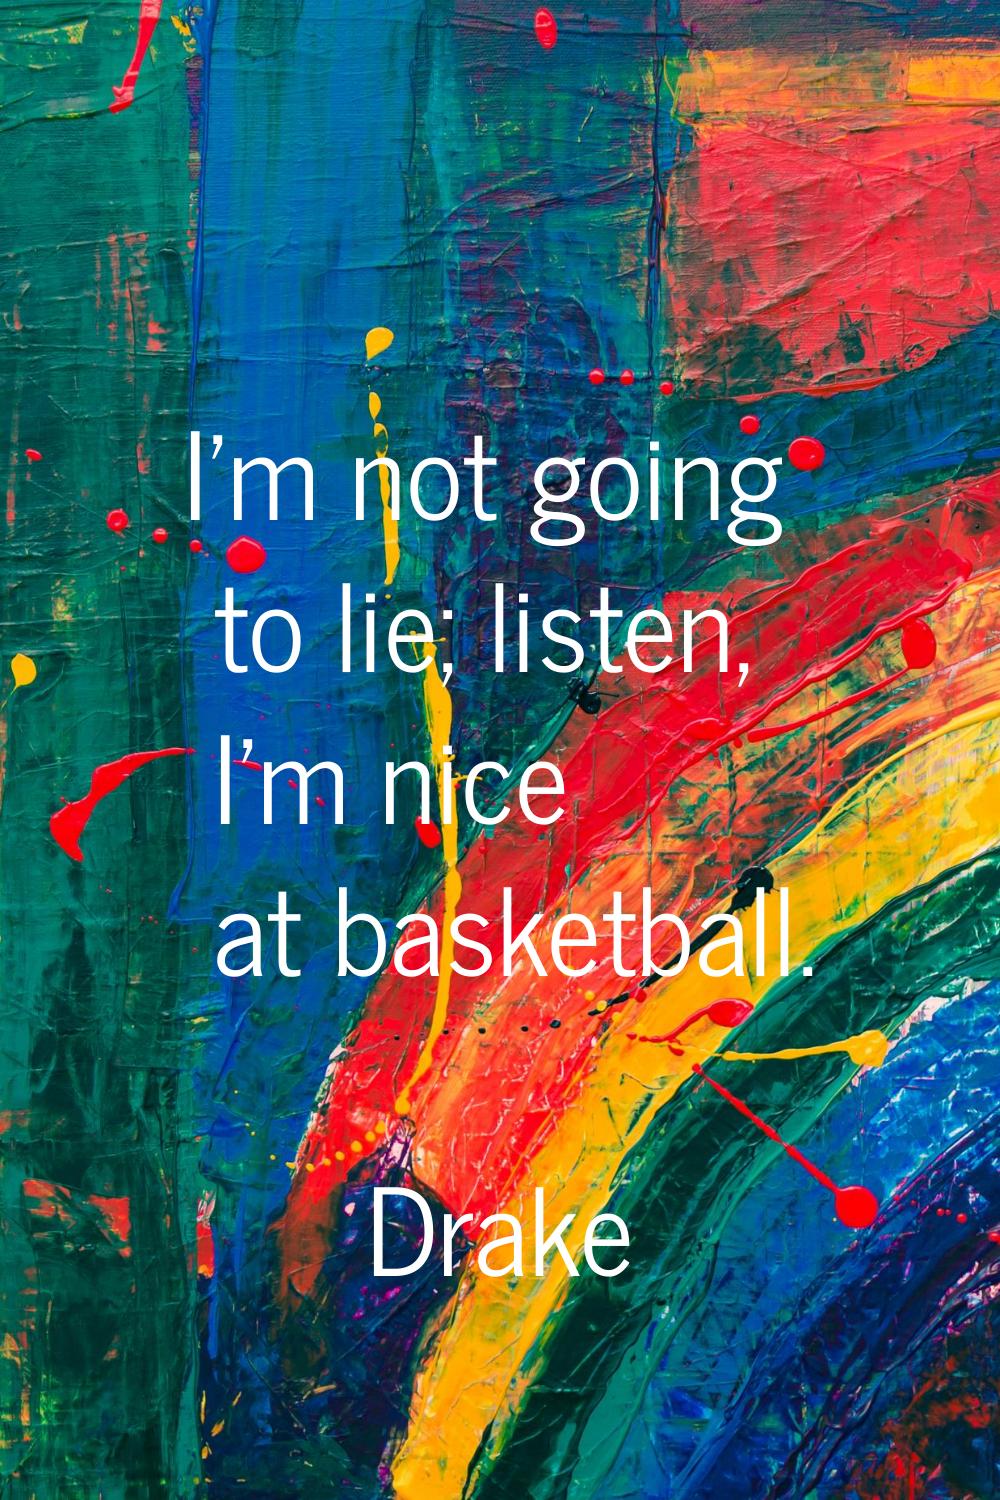 I'm not going to lie; listen, I'm nice at basketball.